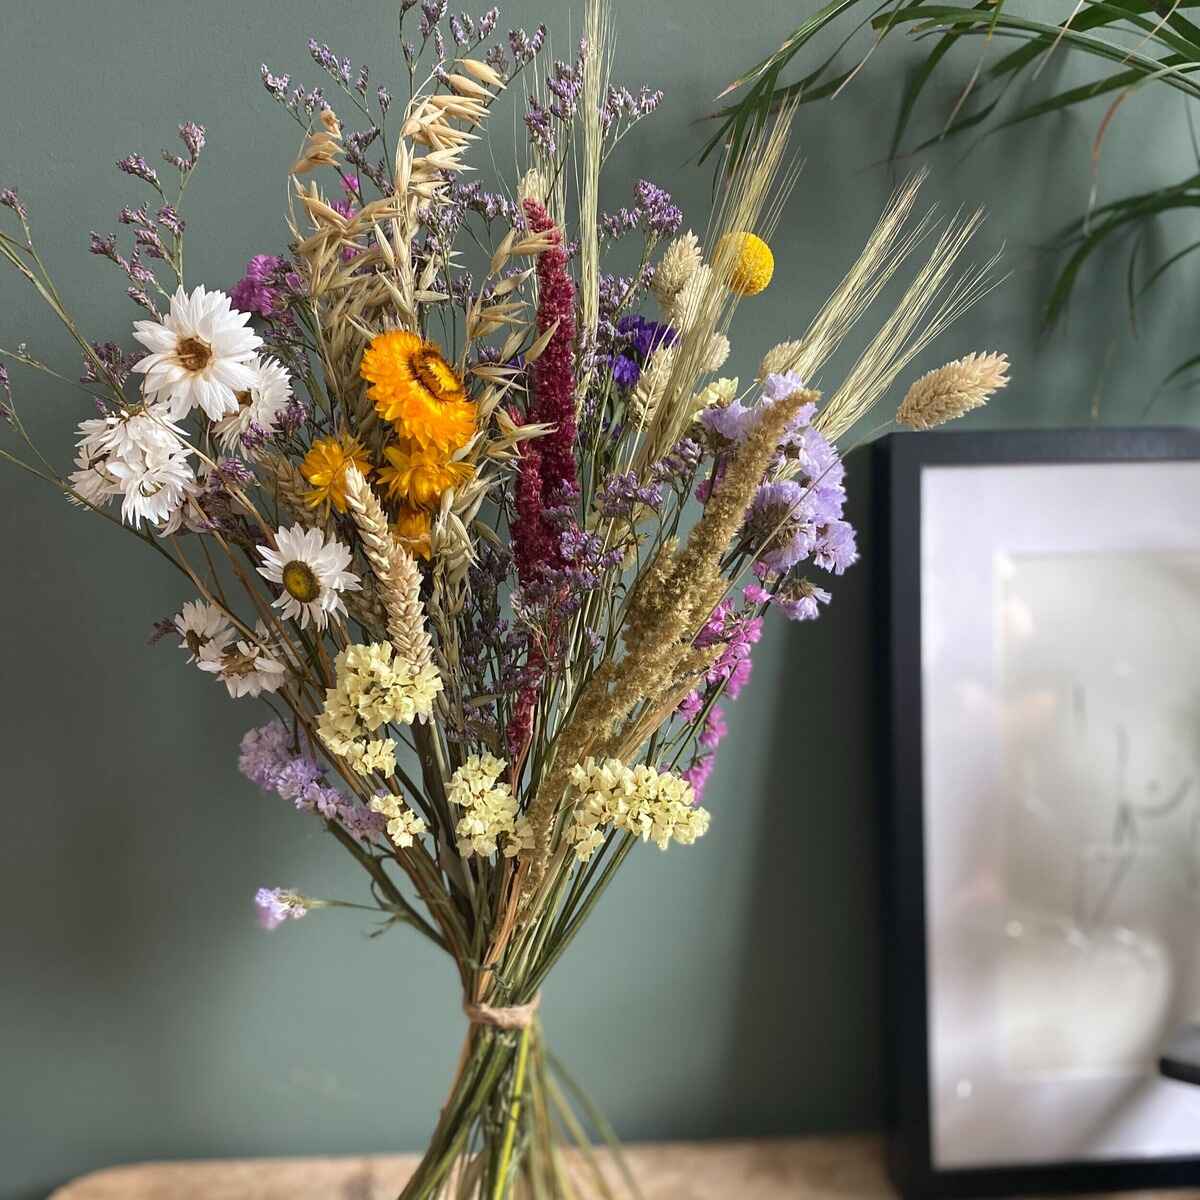 How To Display Dried Flowers In A Vase